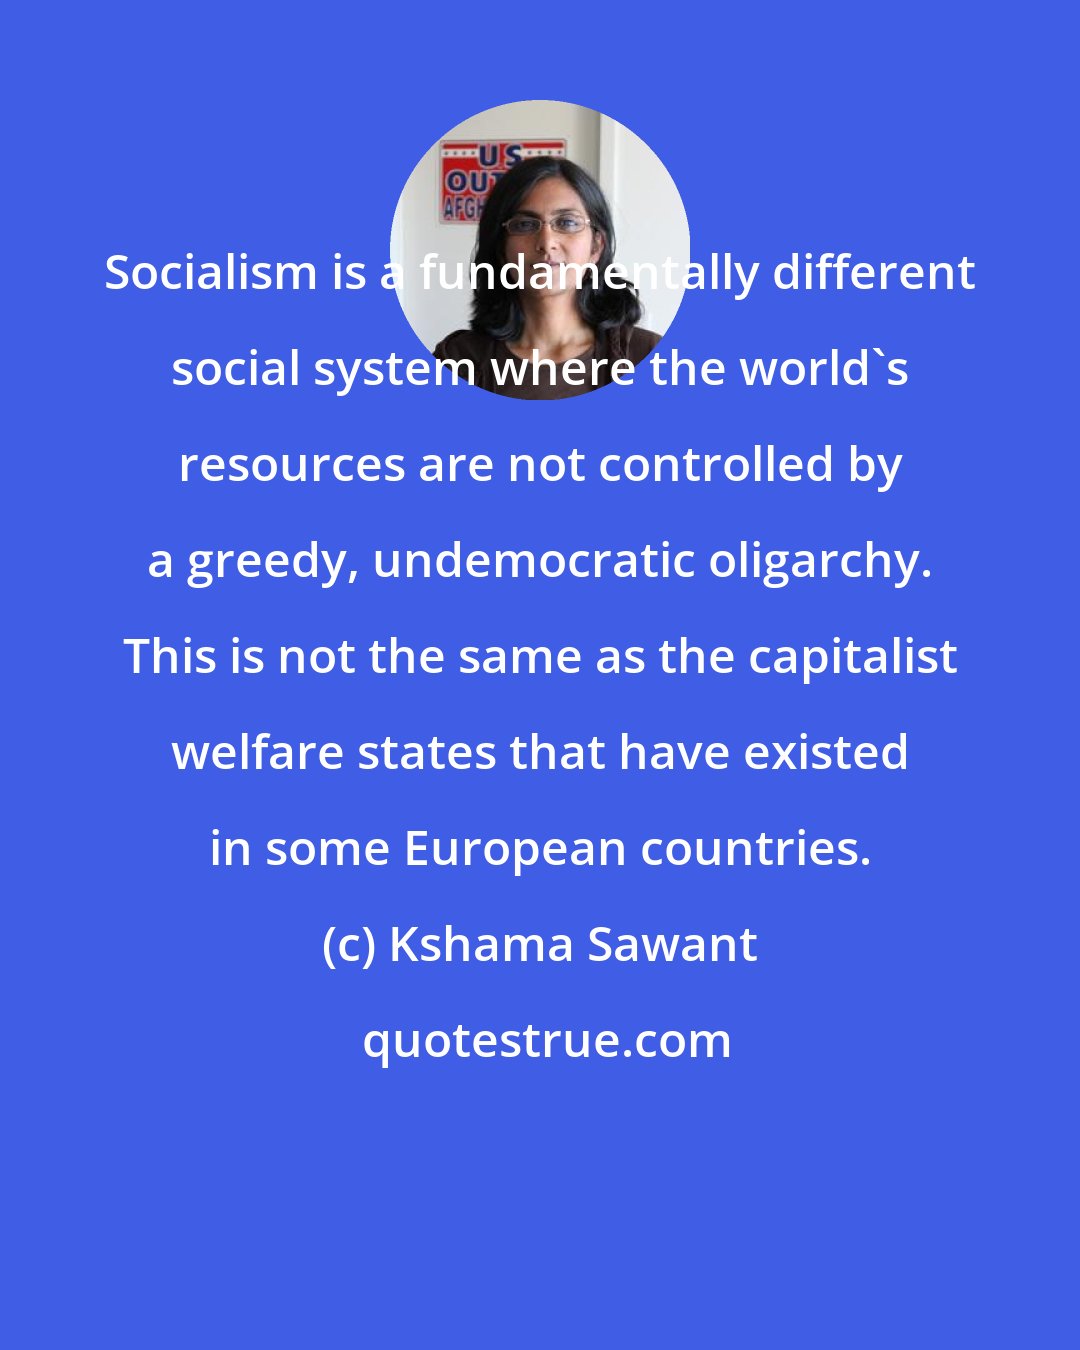 Kshama Sawant: Socialism is a fundamentally different social system where the world's resources are not controlled by a greedy, undemocratic oligarchy. This is not the same as the capitalist welfare states that have existed in some European countries.